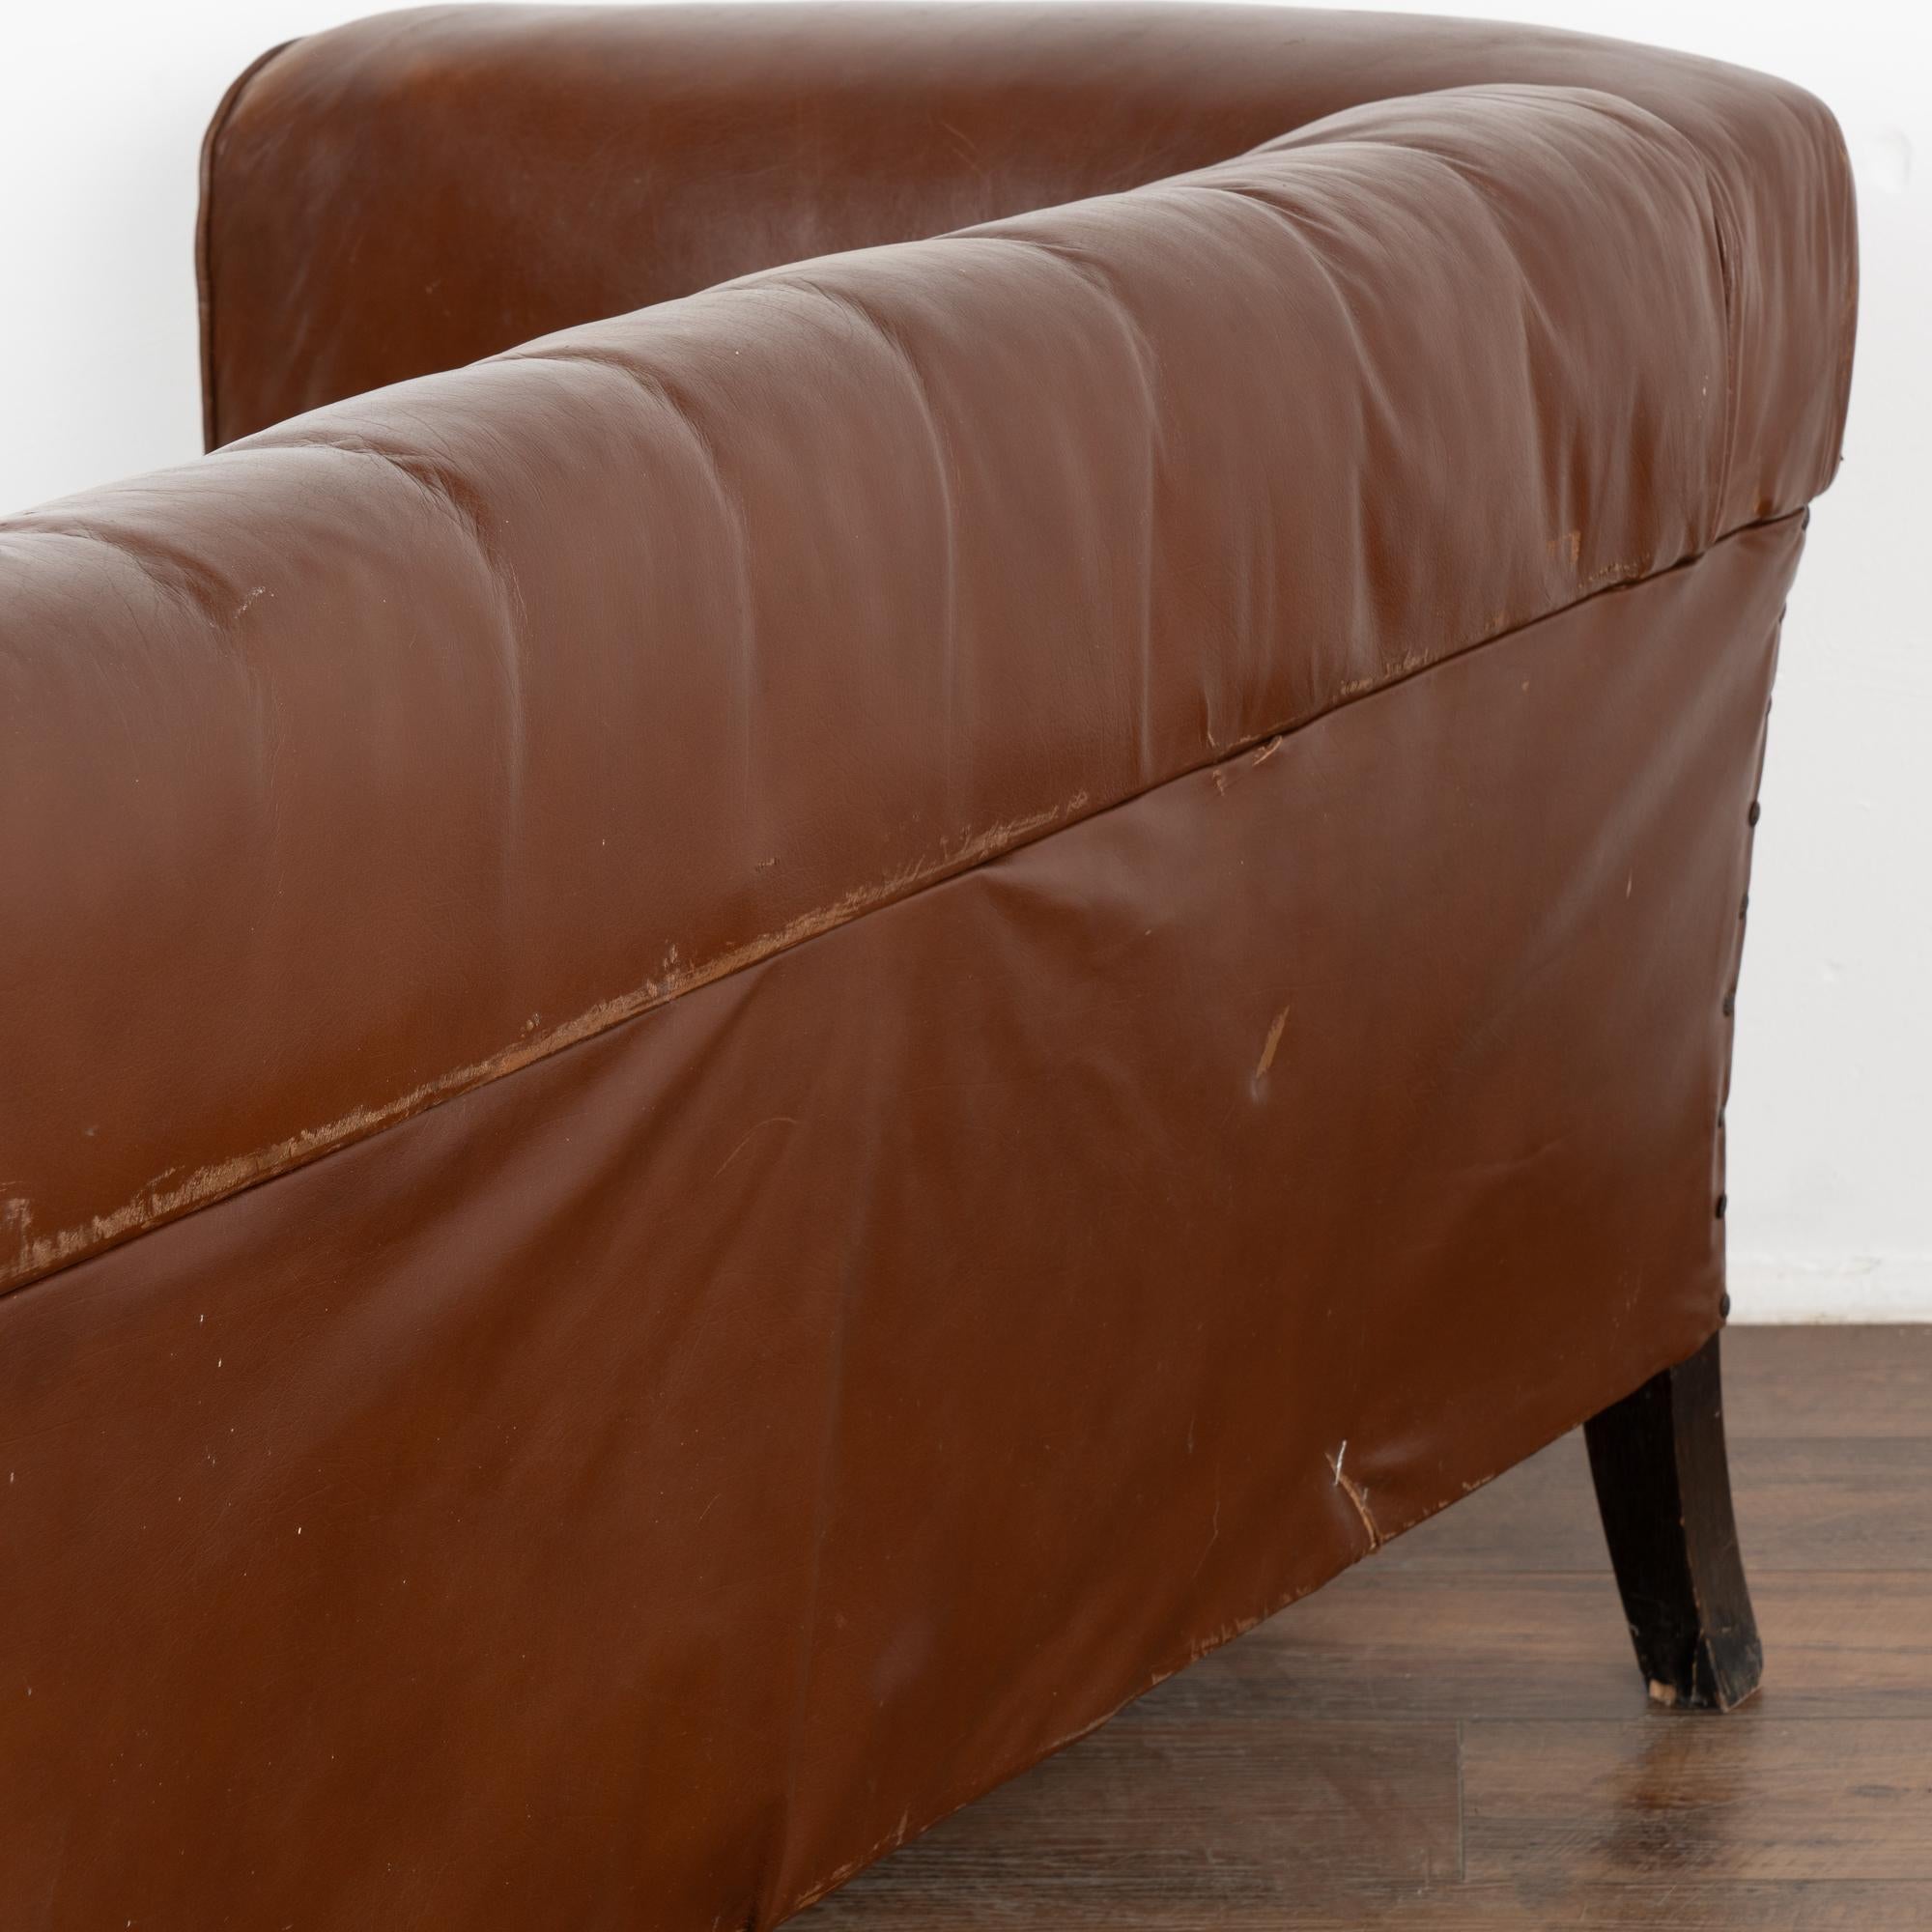 Set of 3, Vintage Brown Leather Sofa and Pair of Club Chairs, Denmark circa 1960 For Sale 2